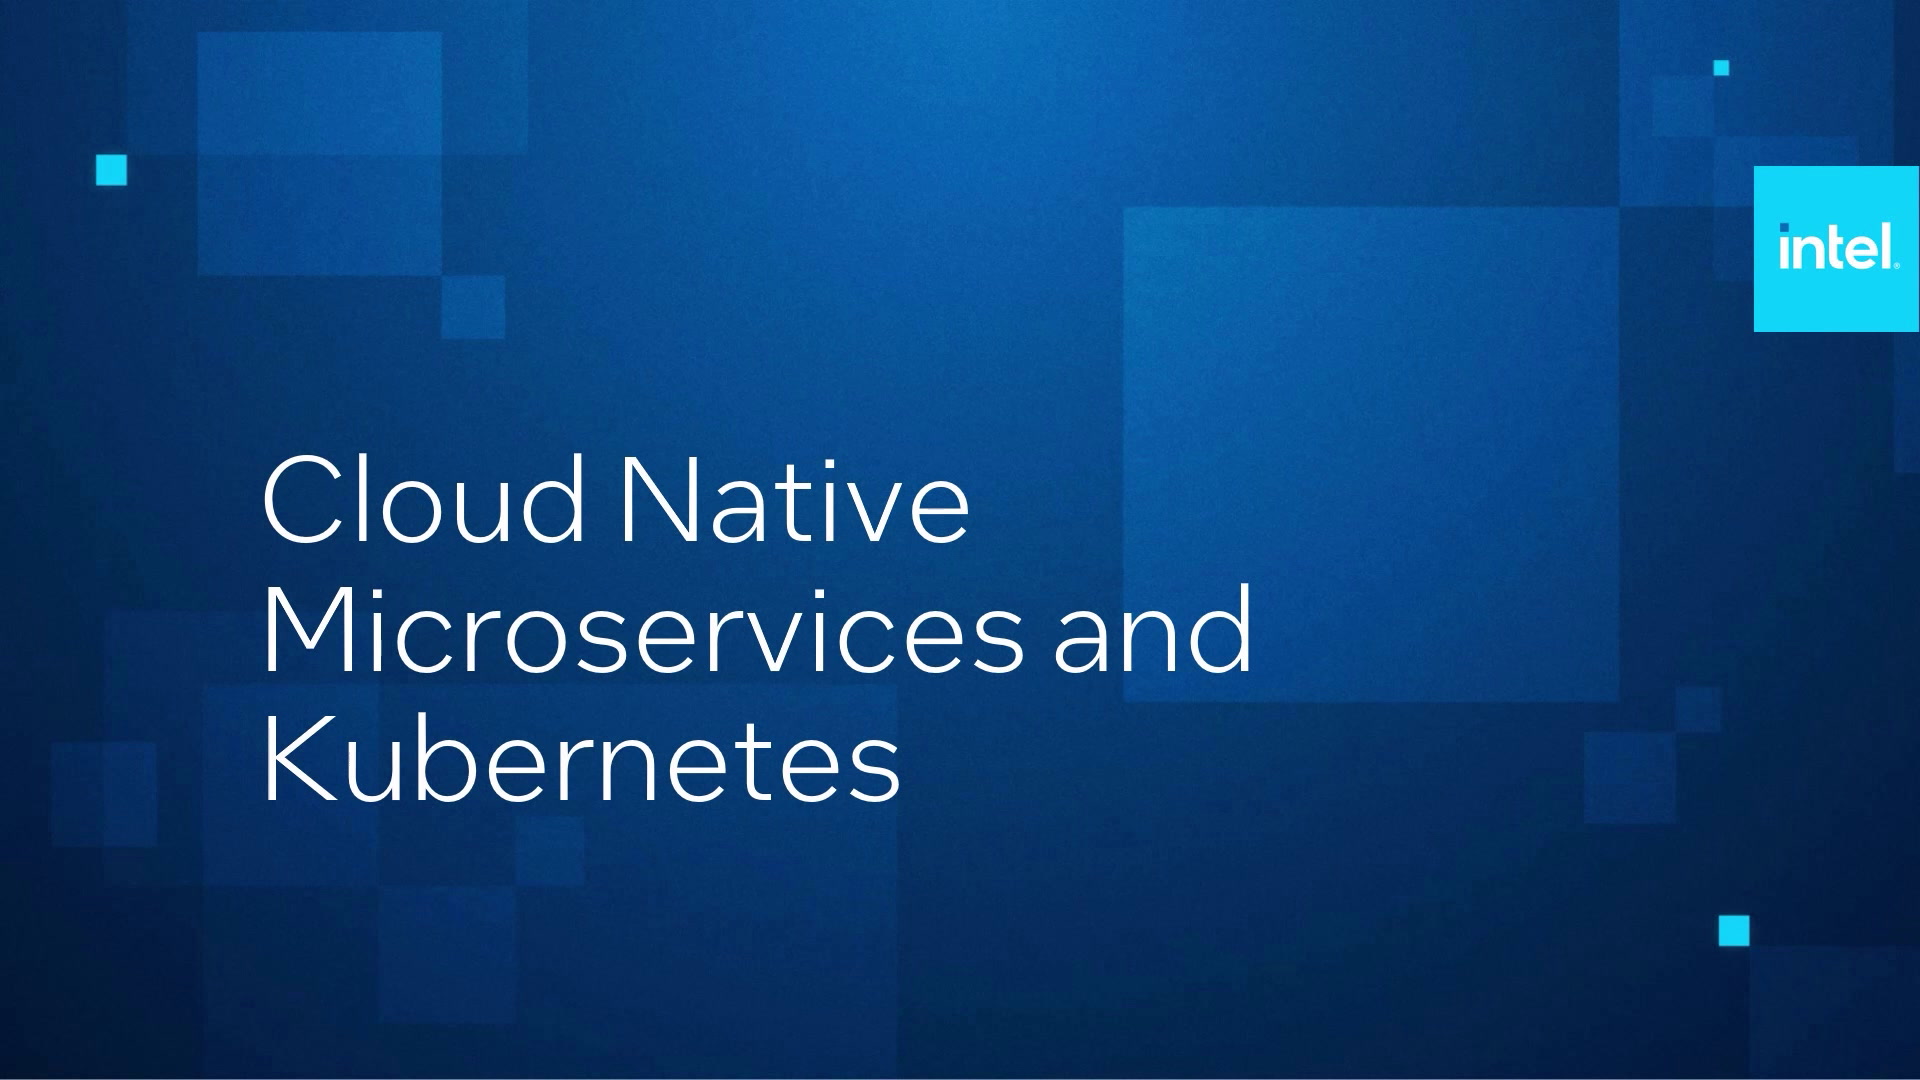 Cloud Native Microservices and Kubernetes